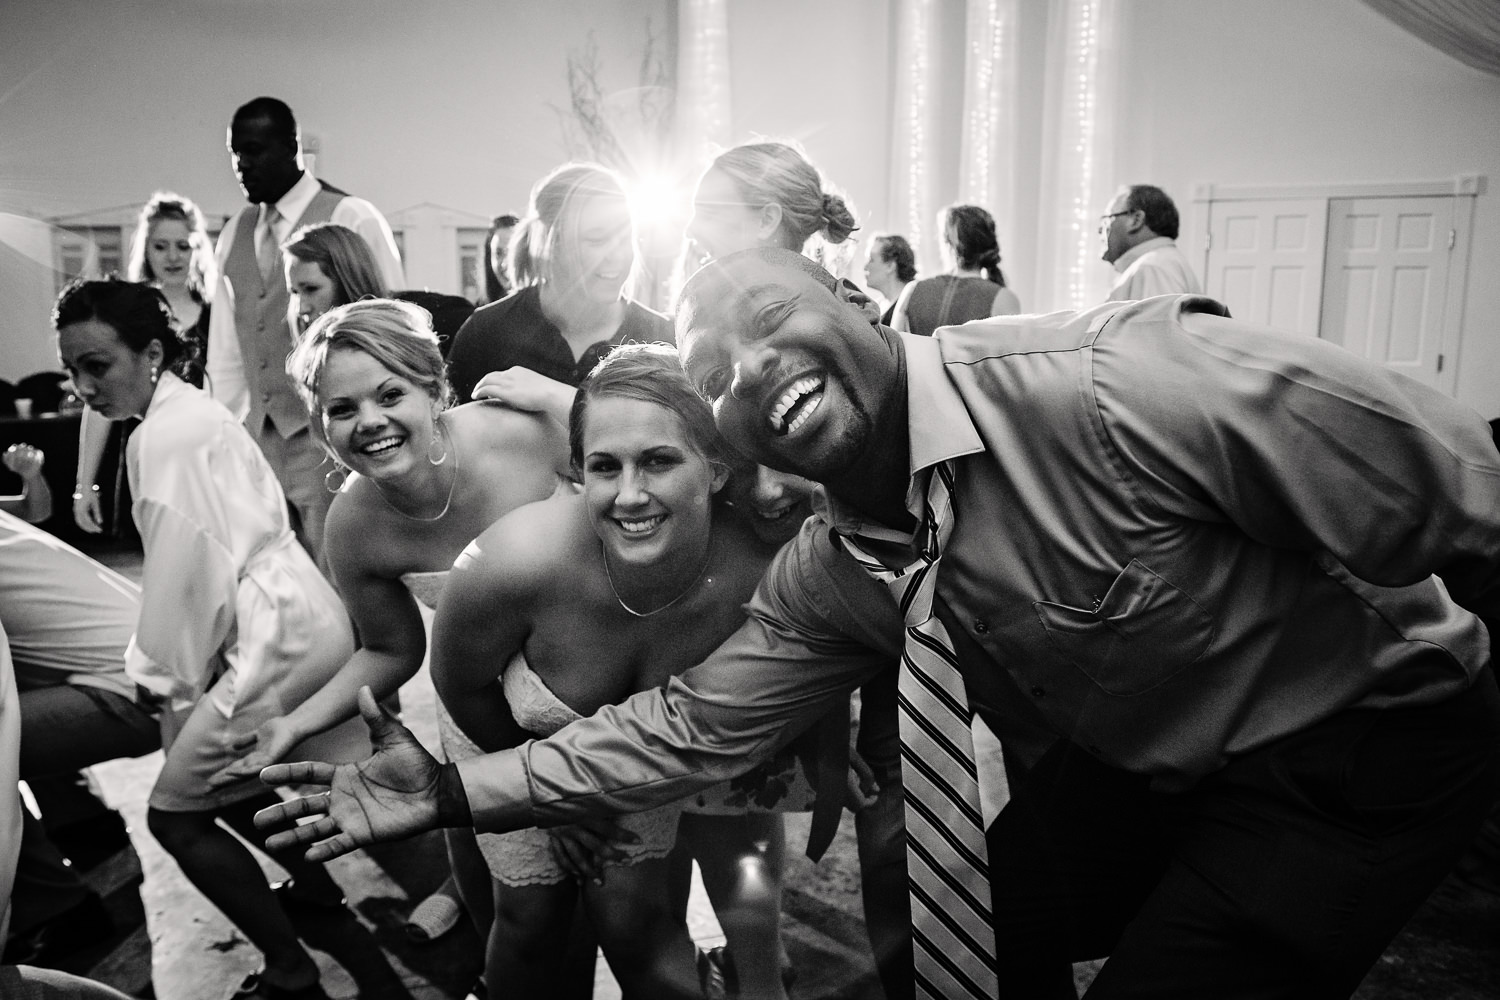 billings-montana-chanceys-wedding-reception-father-daughter-guests-candid.jpg